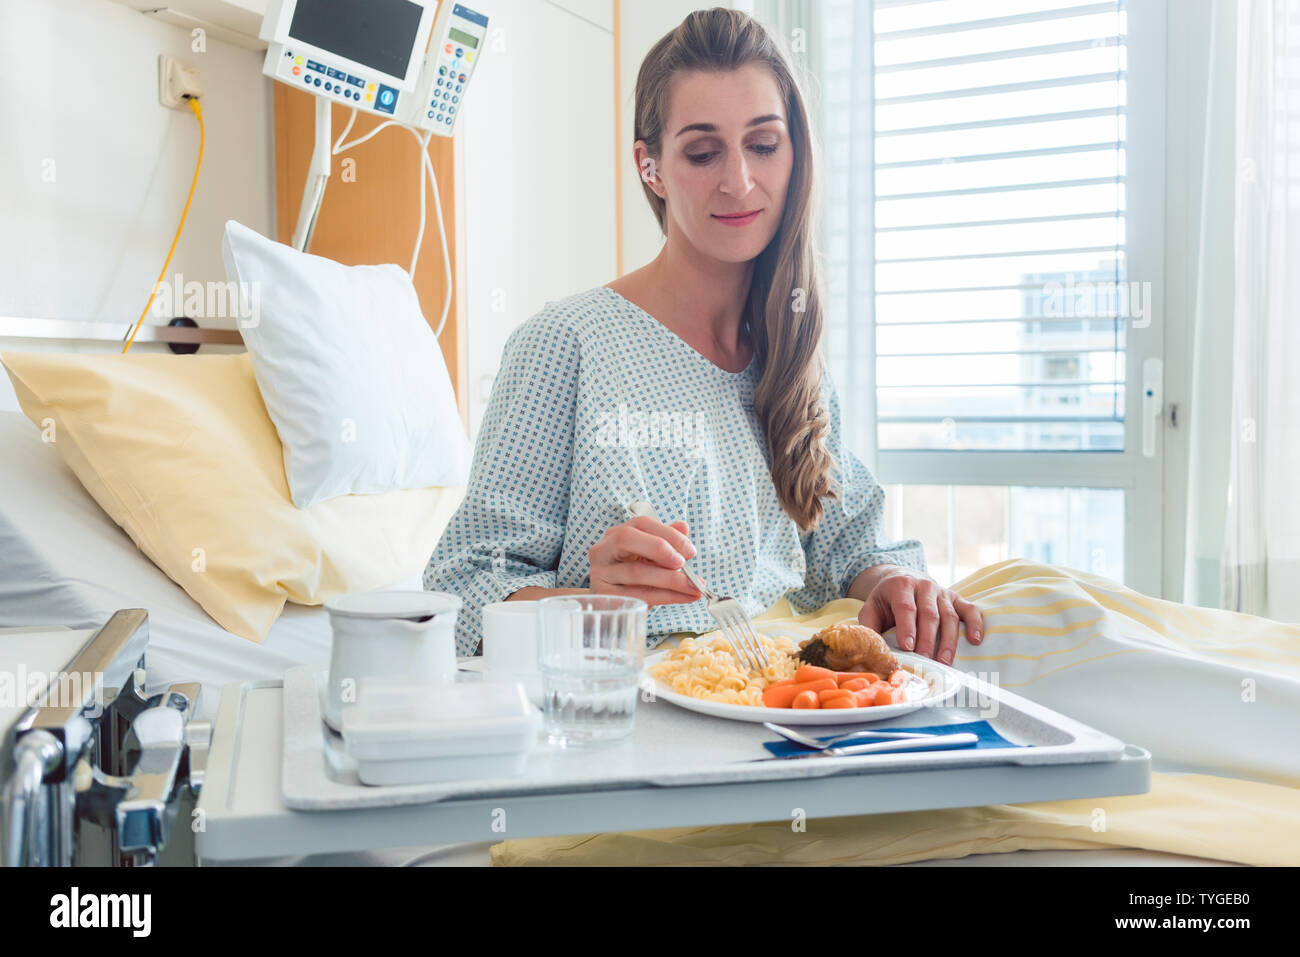 Patient in hospital lying in bed eating meal Stock Photo